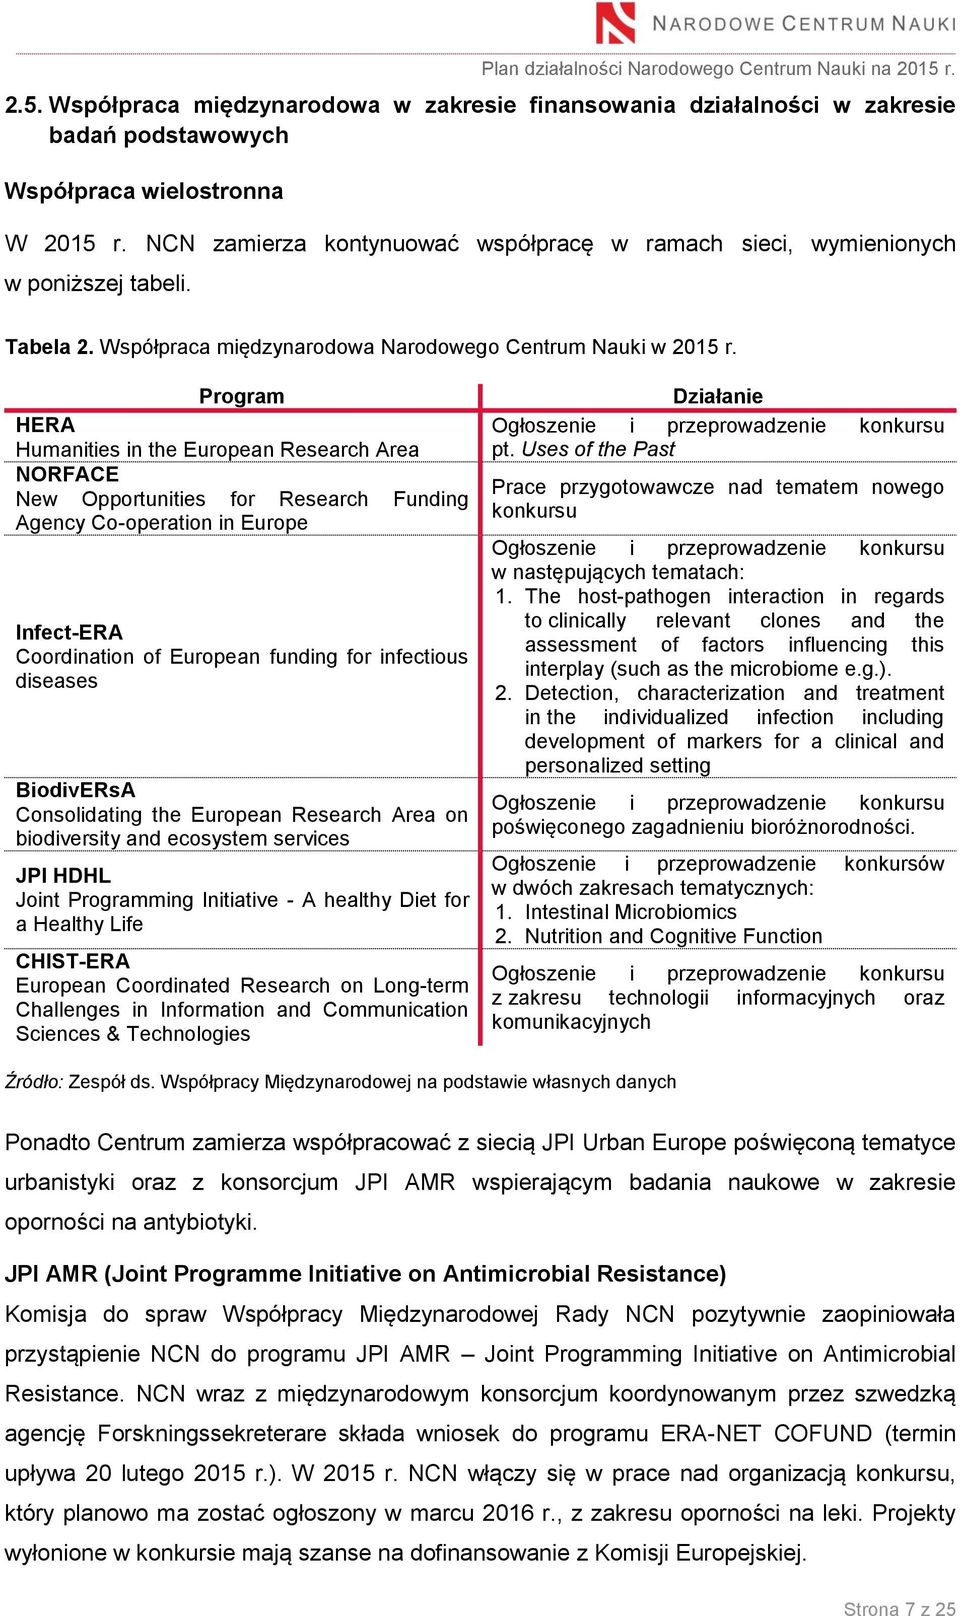 Program HERA Humanities in the European Research Area NORFACE New Opportunities for Research Funding Agency Co-operation in Europe Infect-ERA Coordination of European funding for infectious diseases